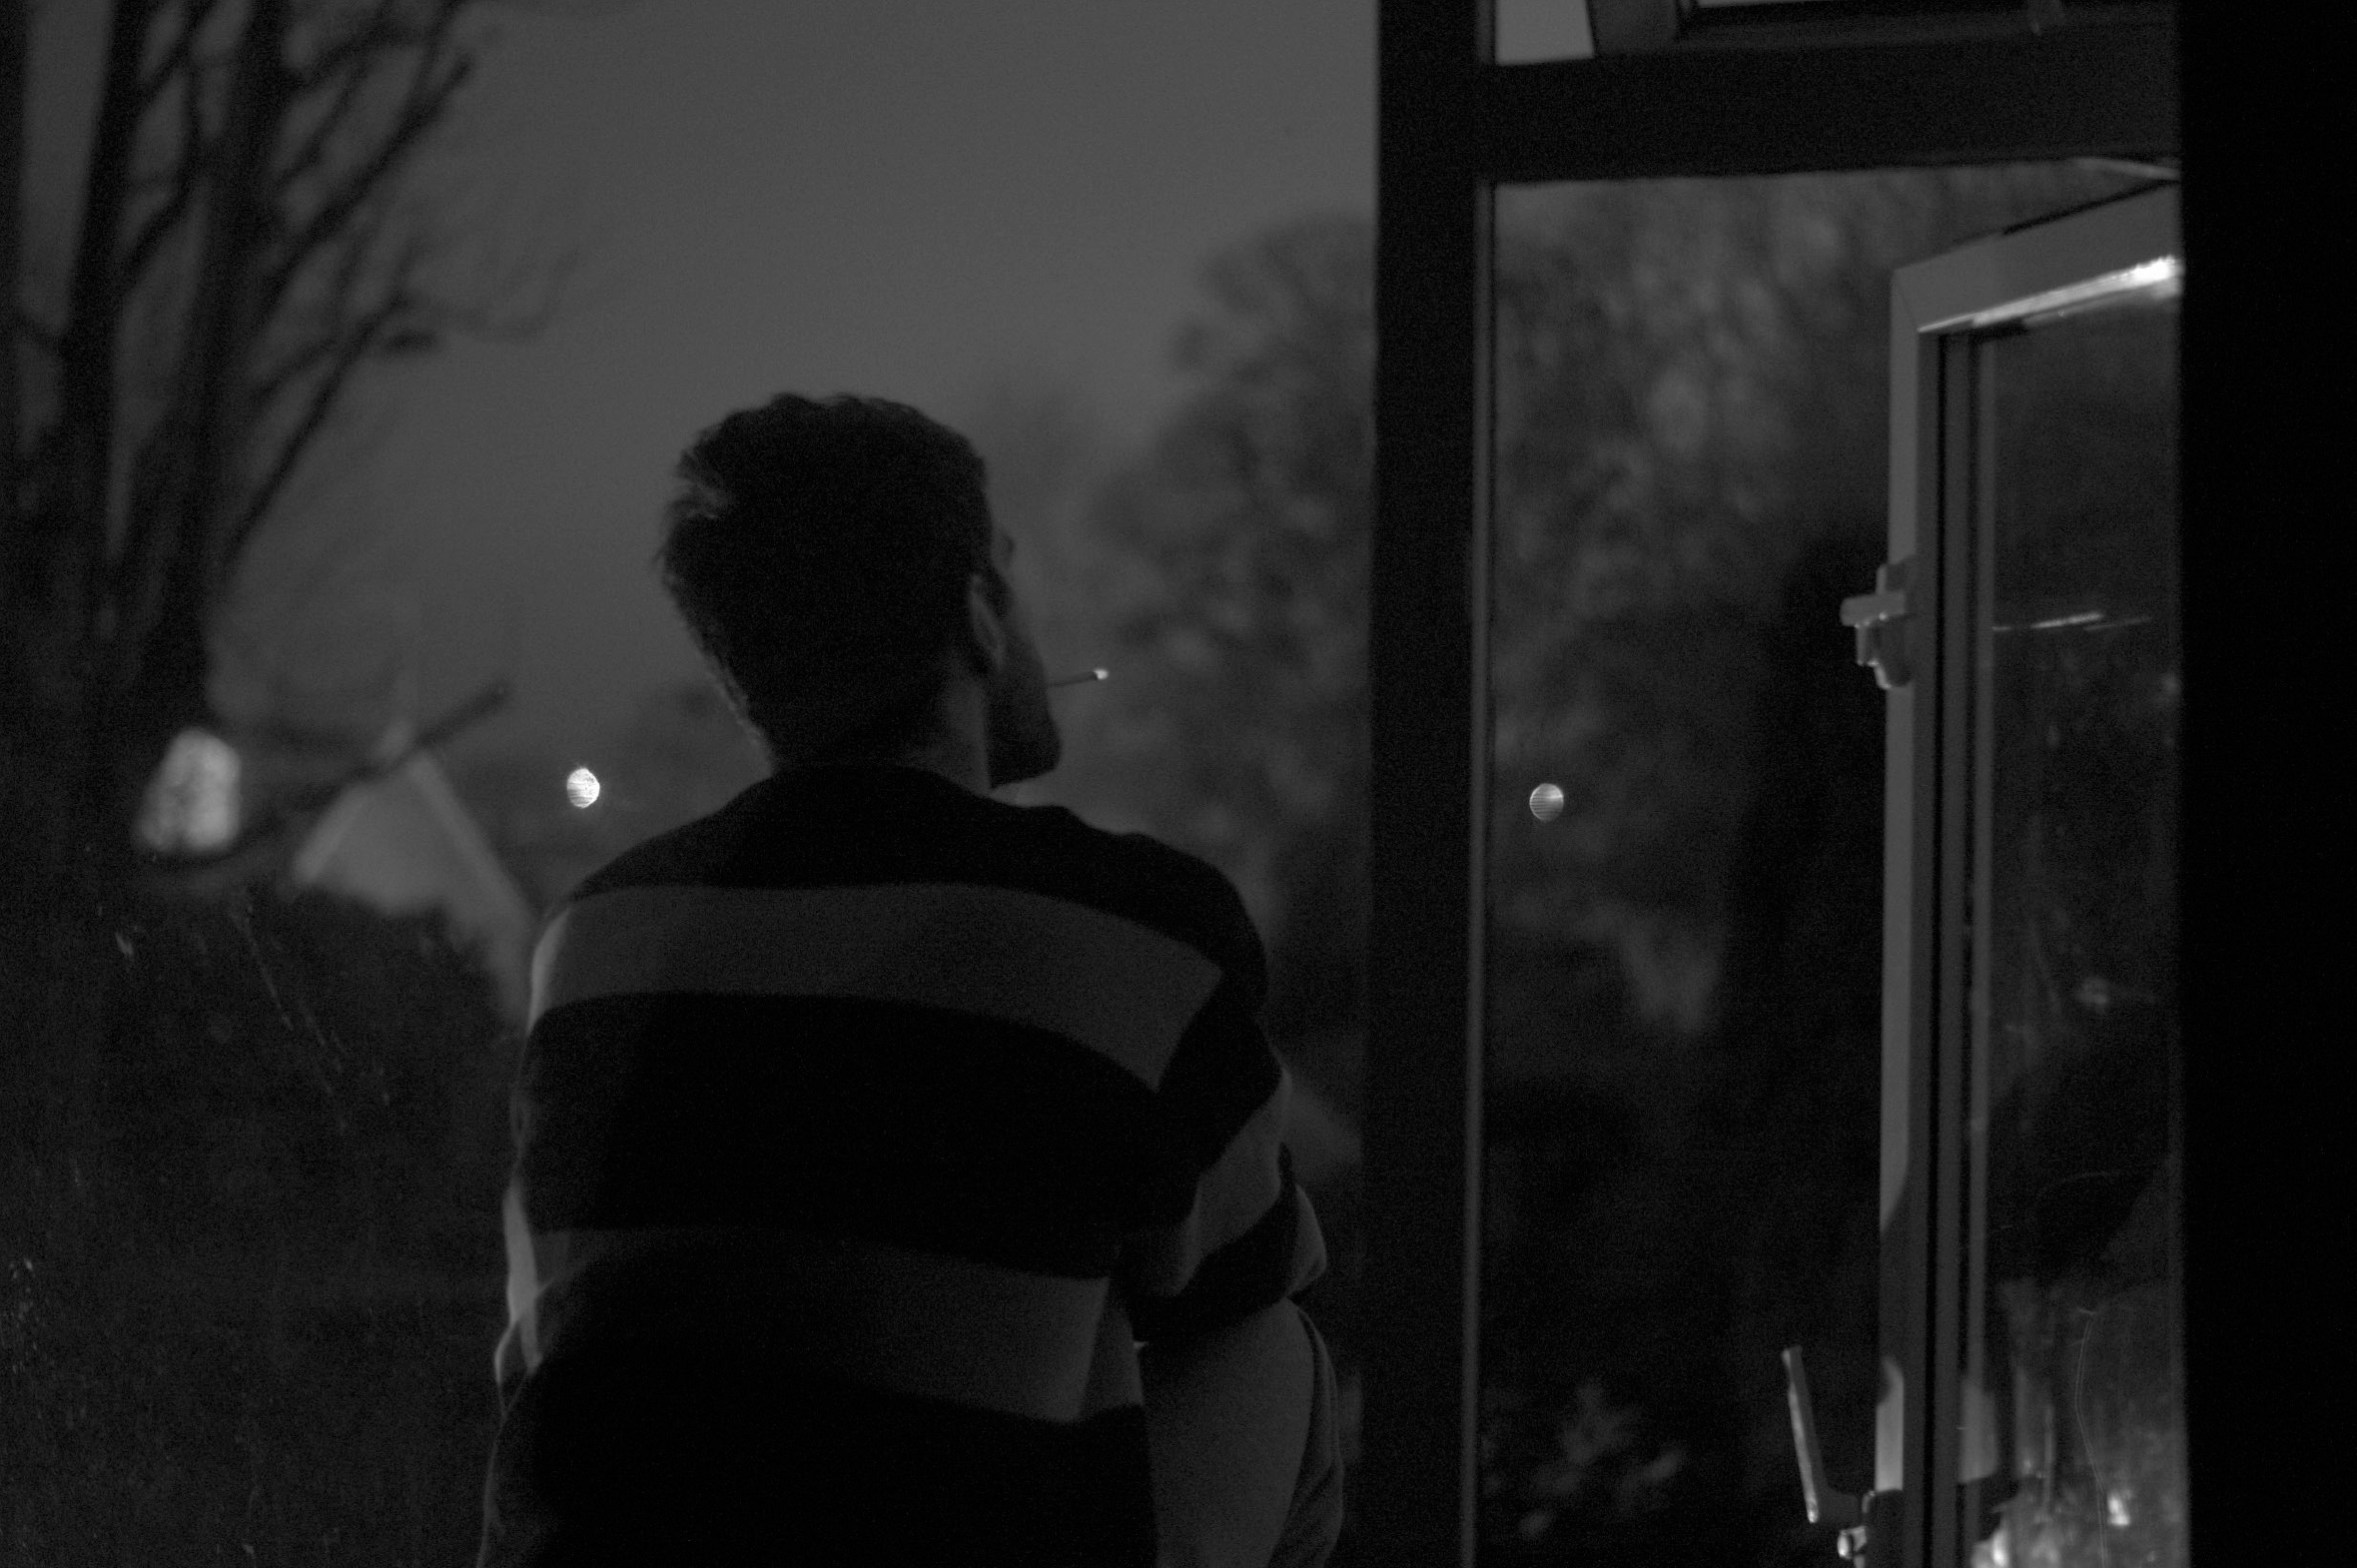 A young man sits and smokes outside of a home in a suburban neighborhood at night.